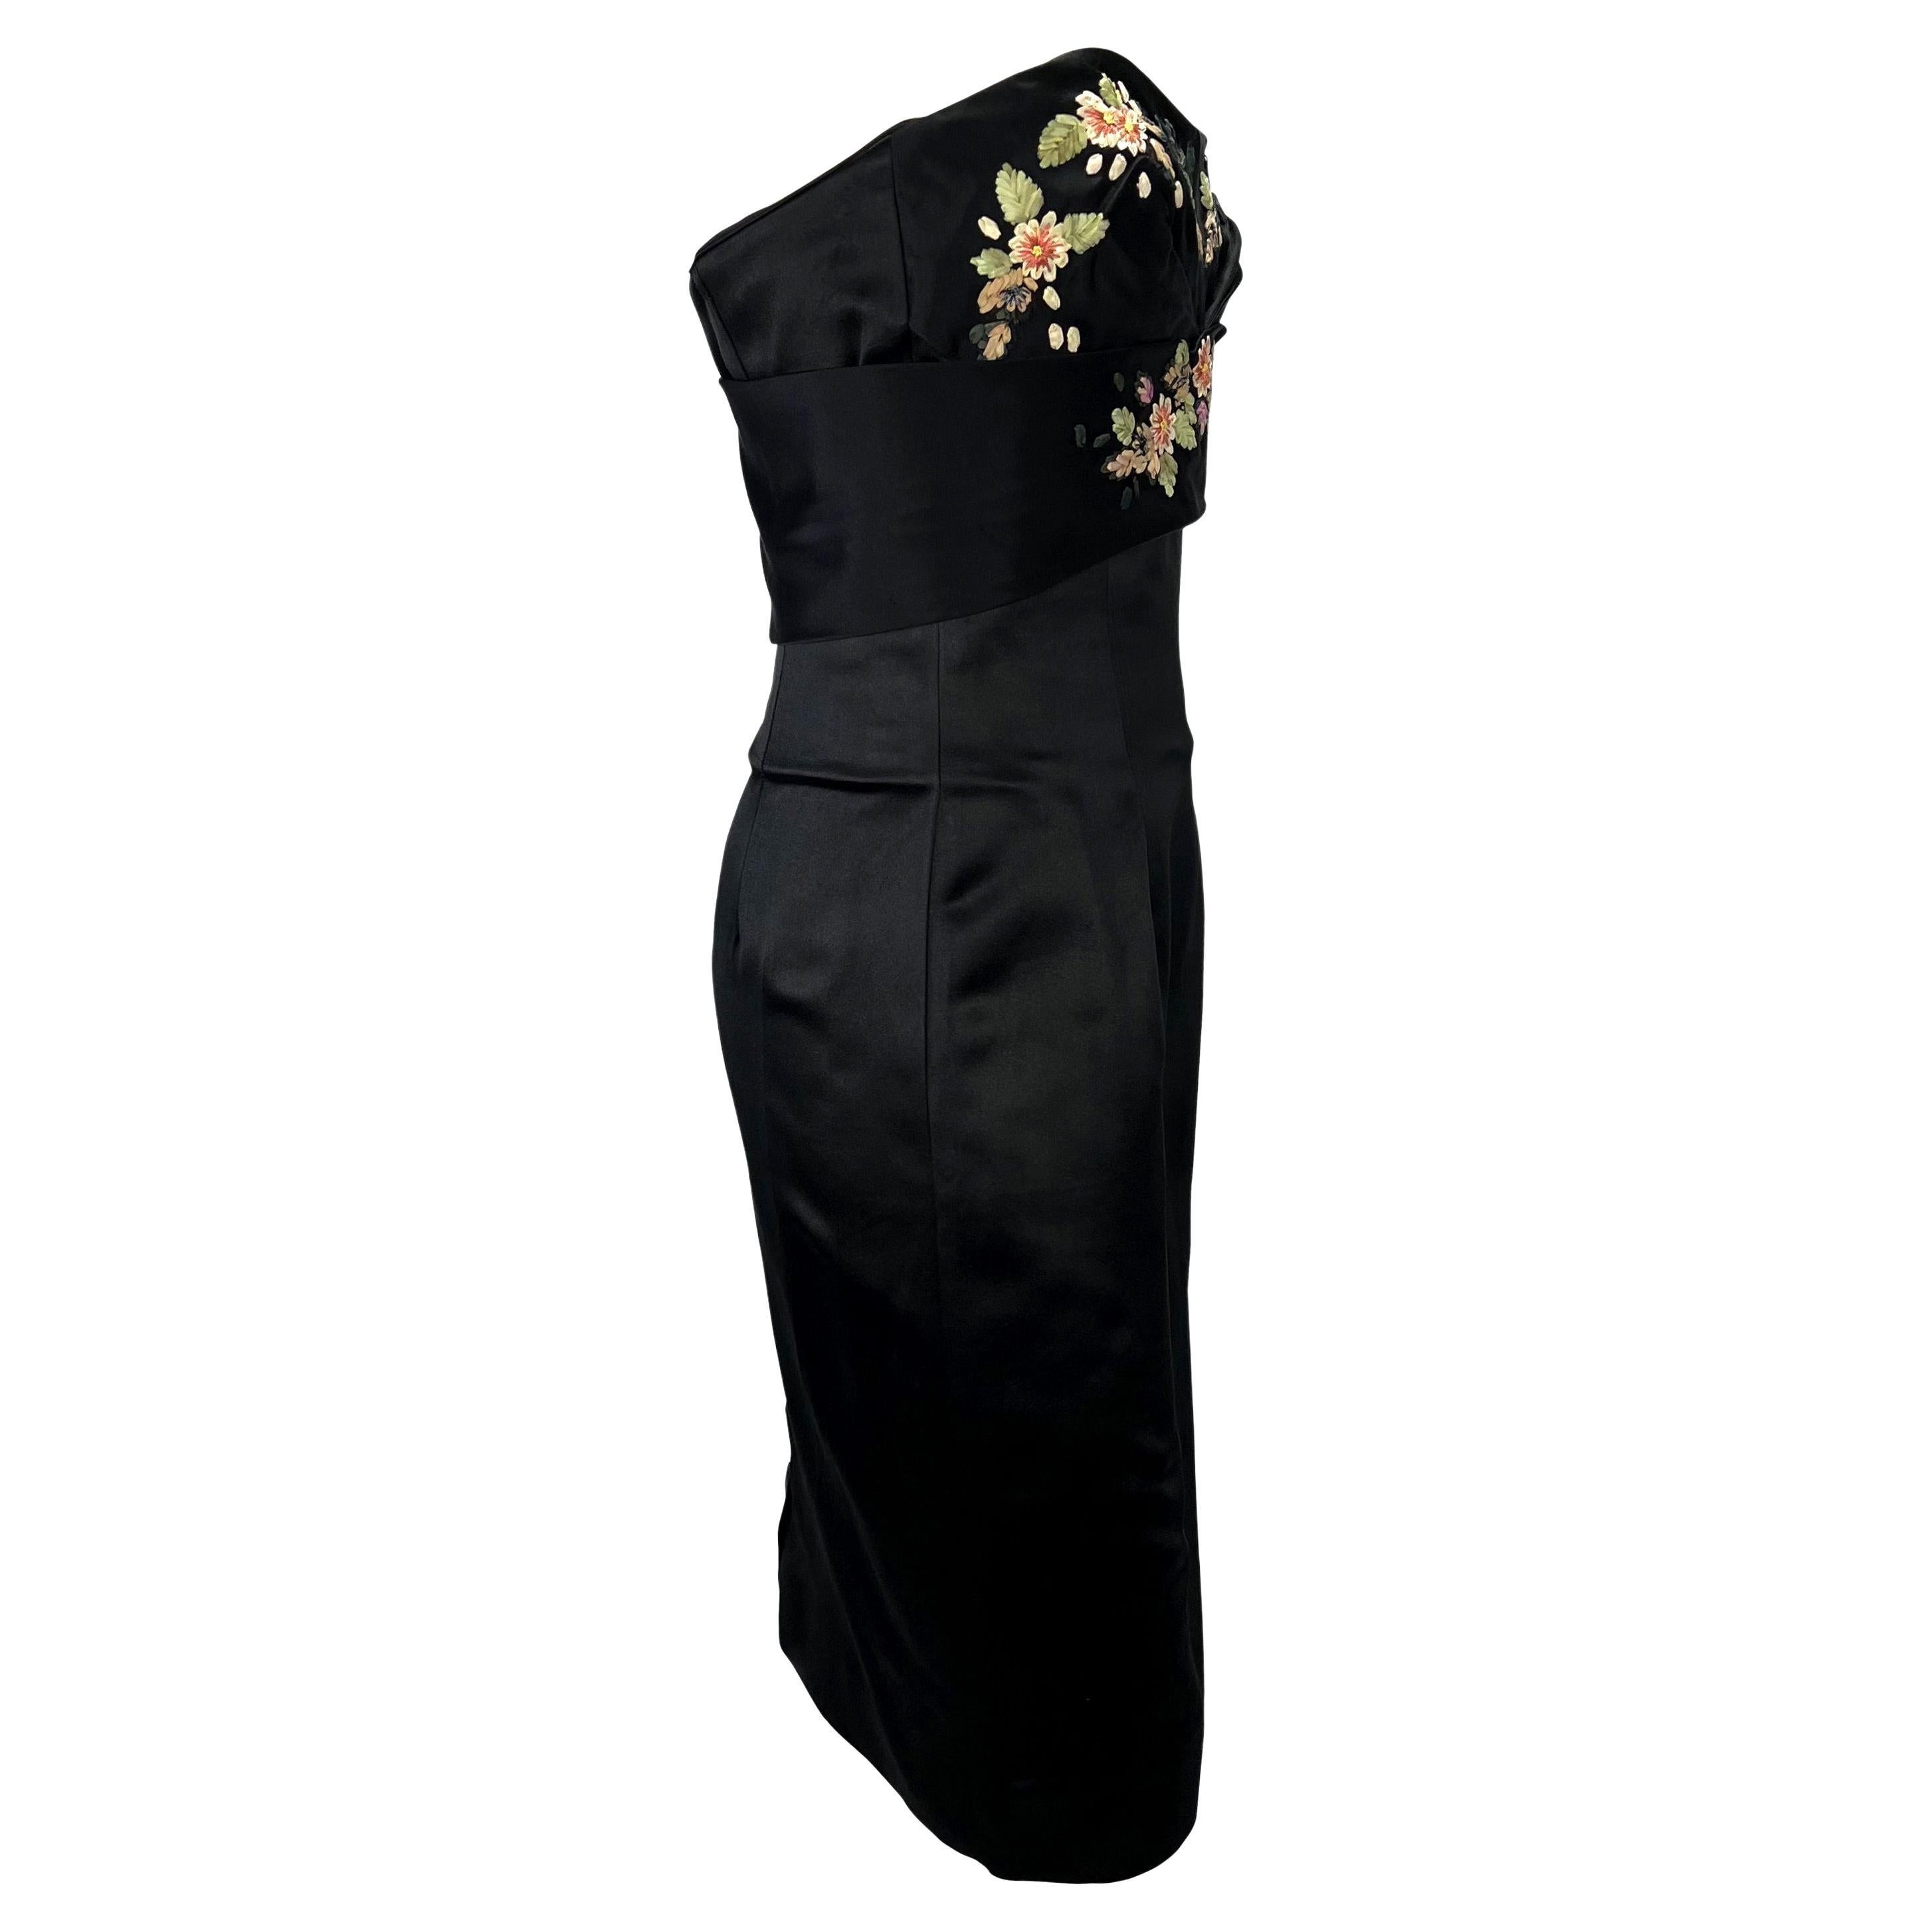 2007 Alexander McQueen Floral Ribbon Embroidery Black Satin Boned Bustier Dress  In Excellent Condition For Sale In West Hollywood, CA